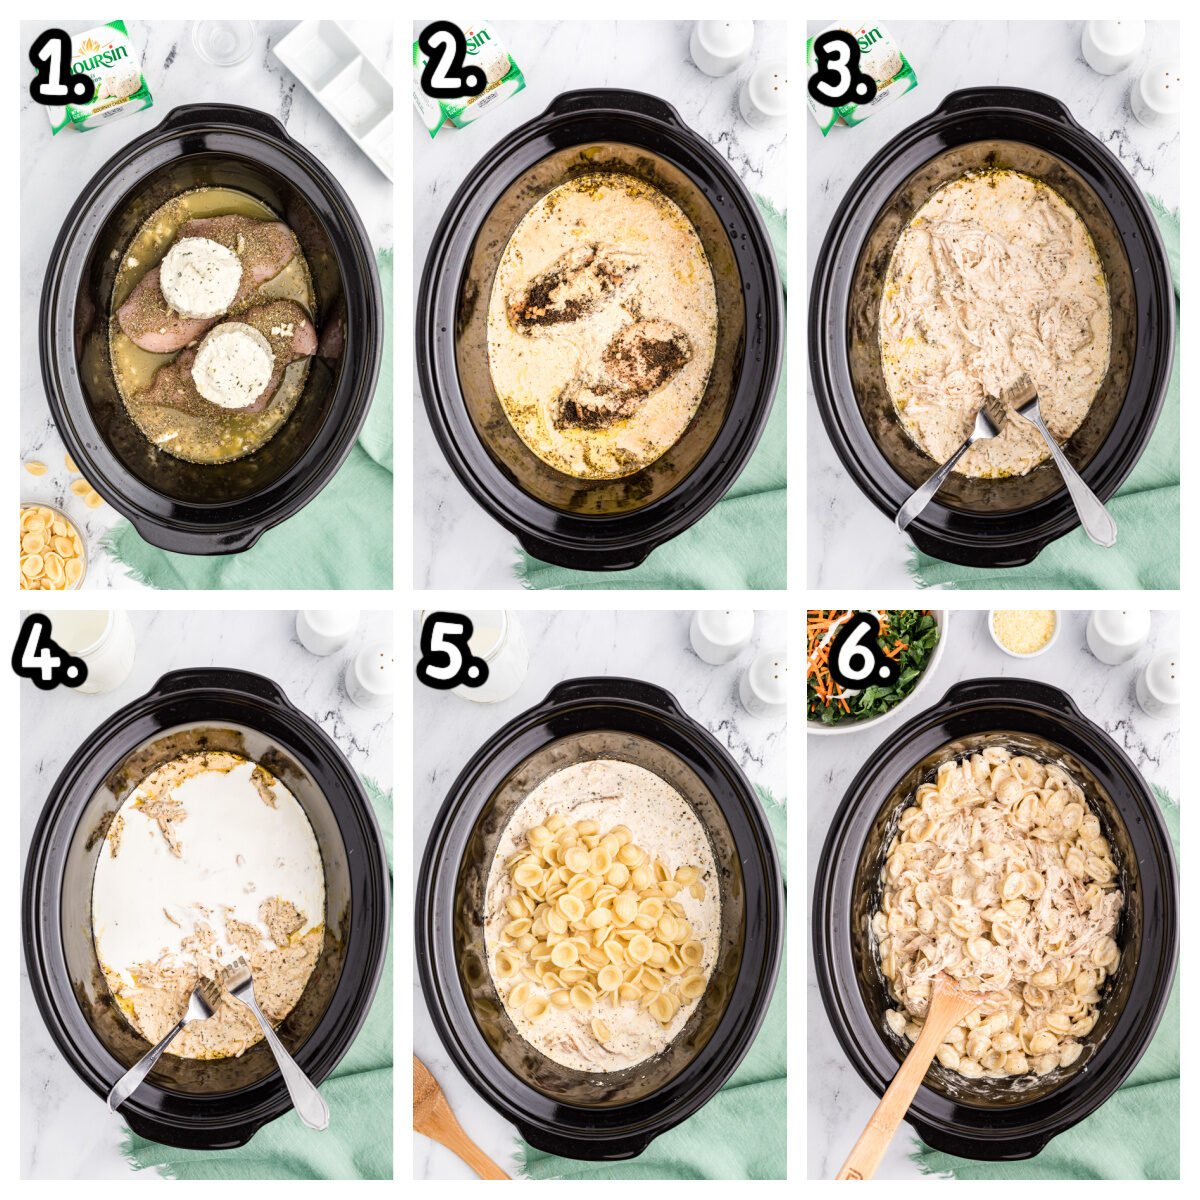 6 images showing how to assemeble boursin cheese chicken pasta in slow cooker.